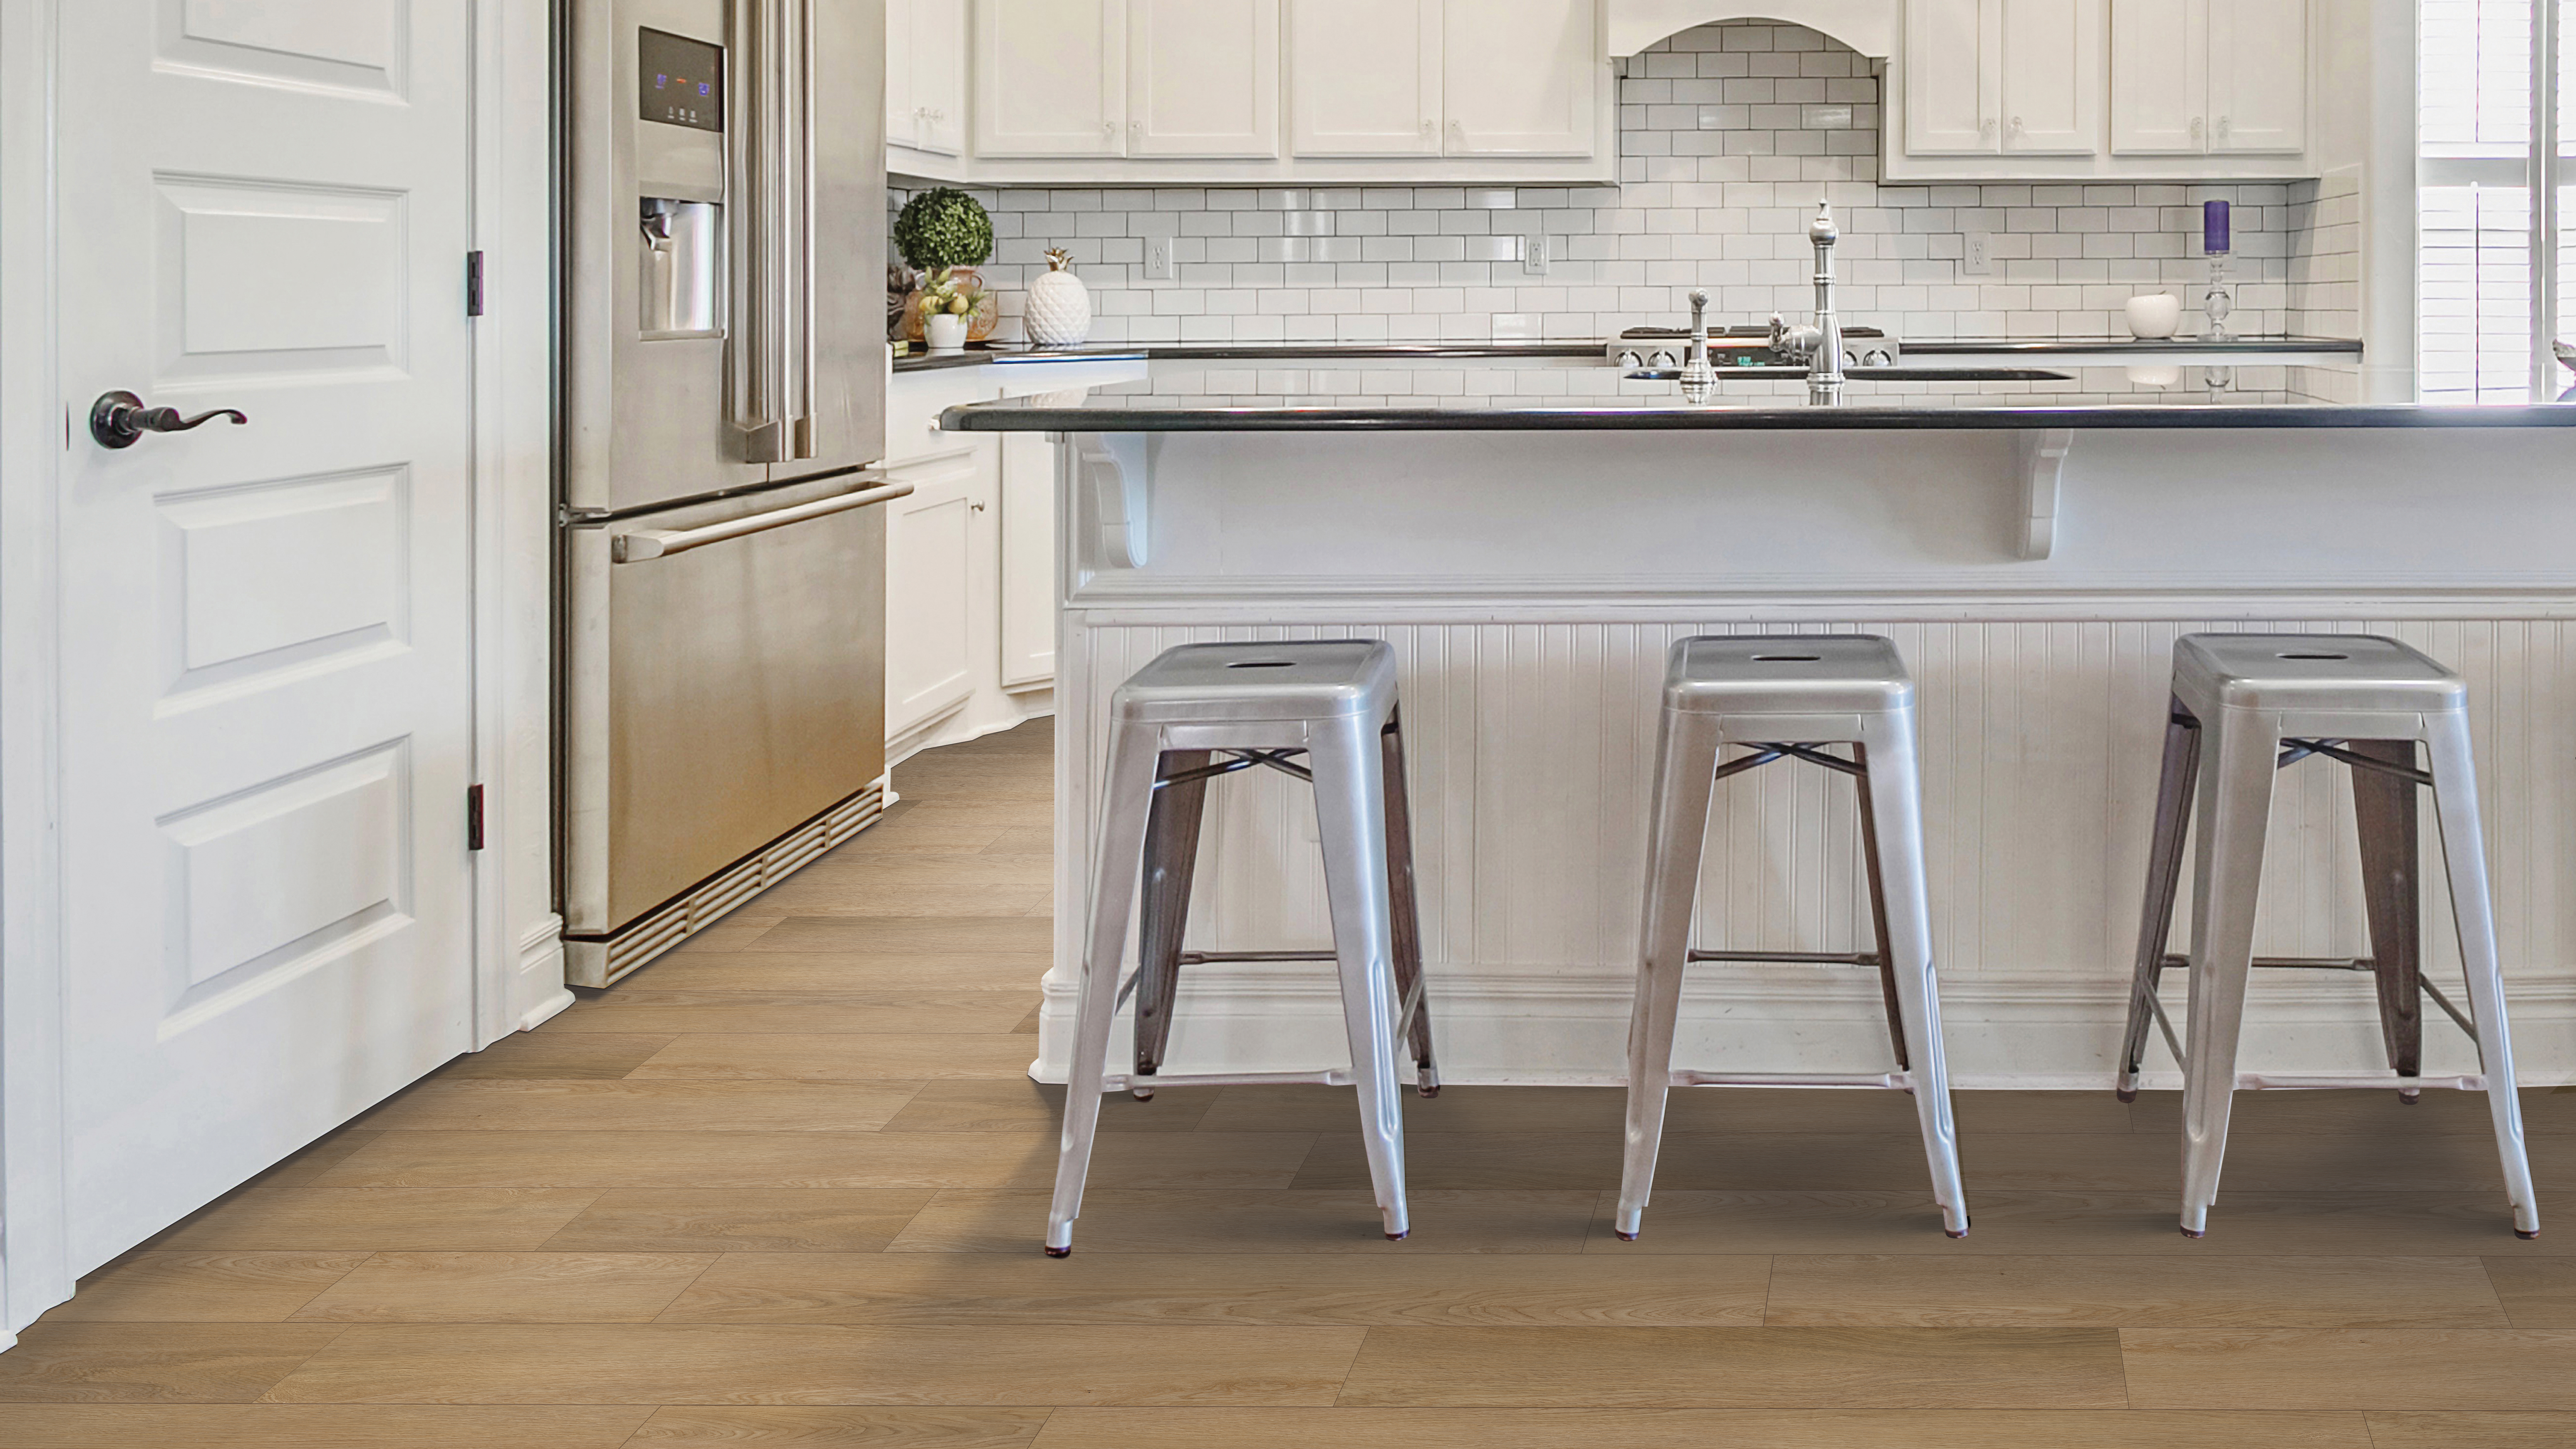 Downs LVT in kitchen featuring modern island and bar stools.